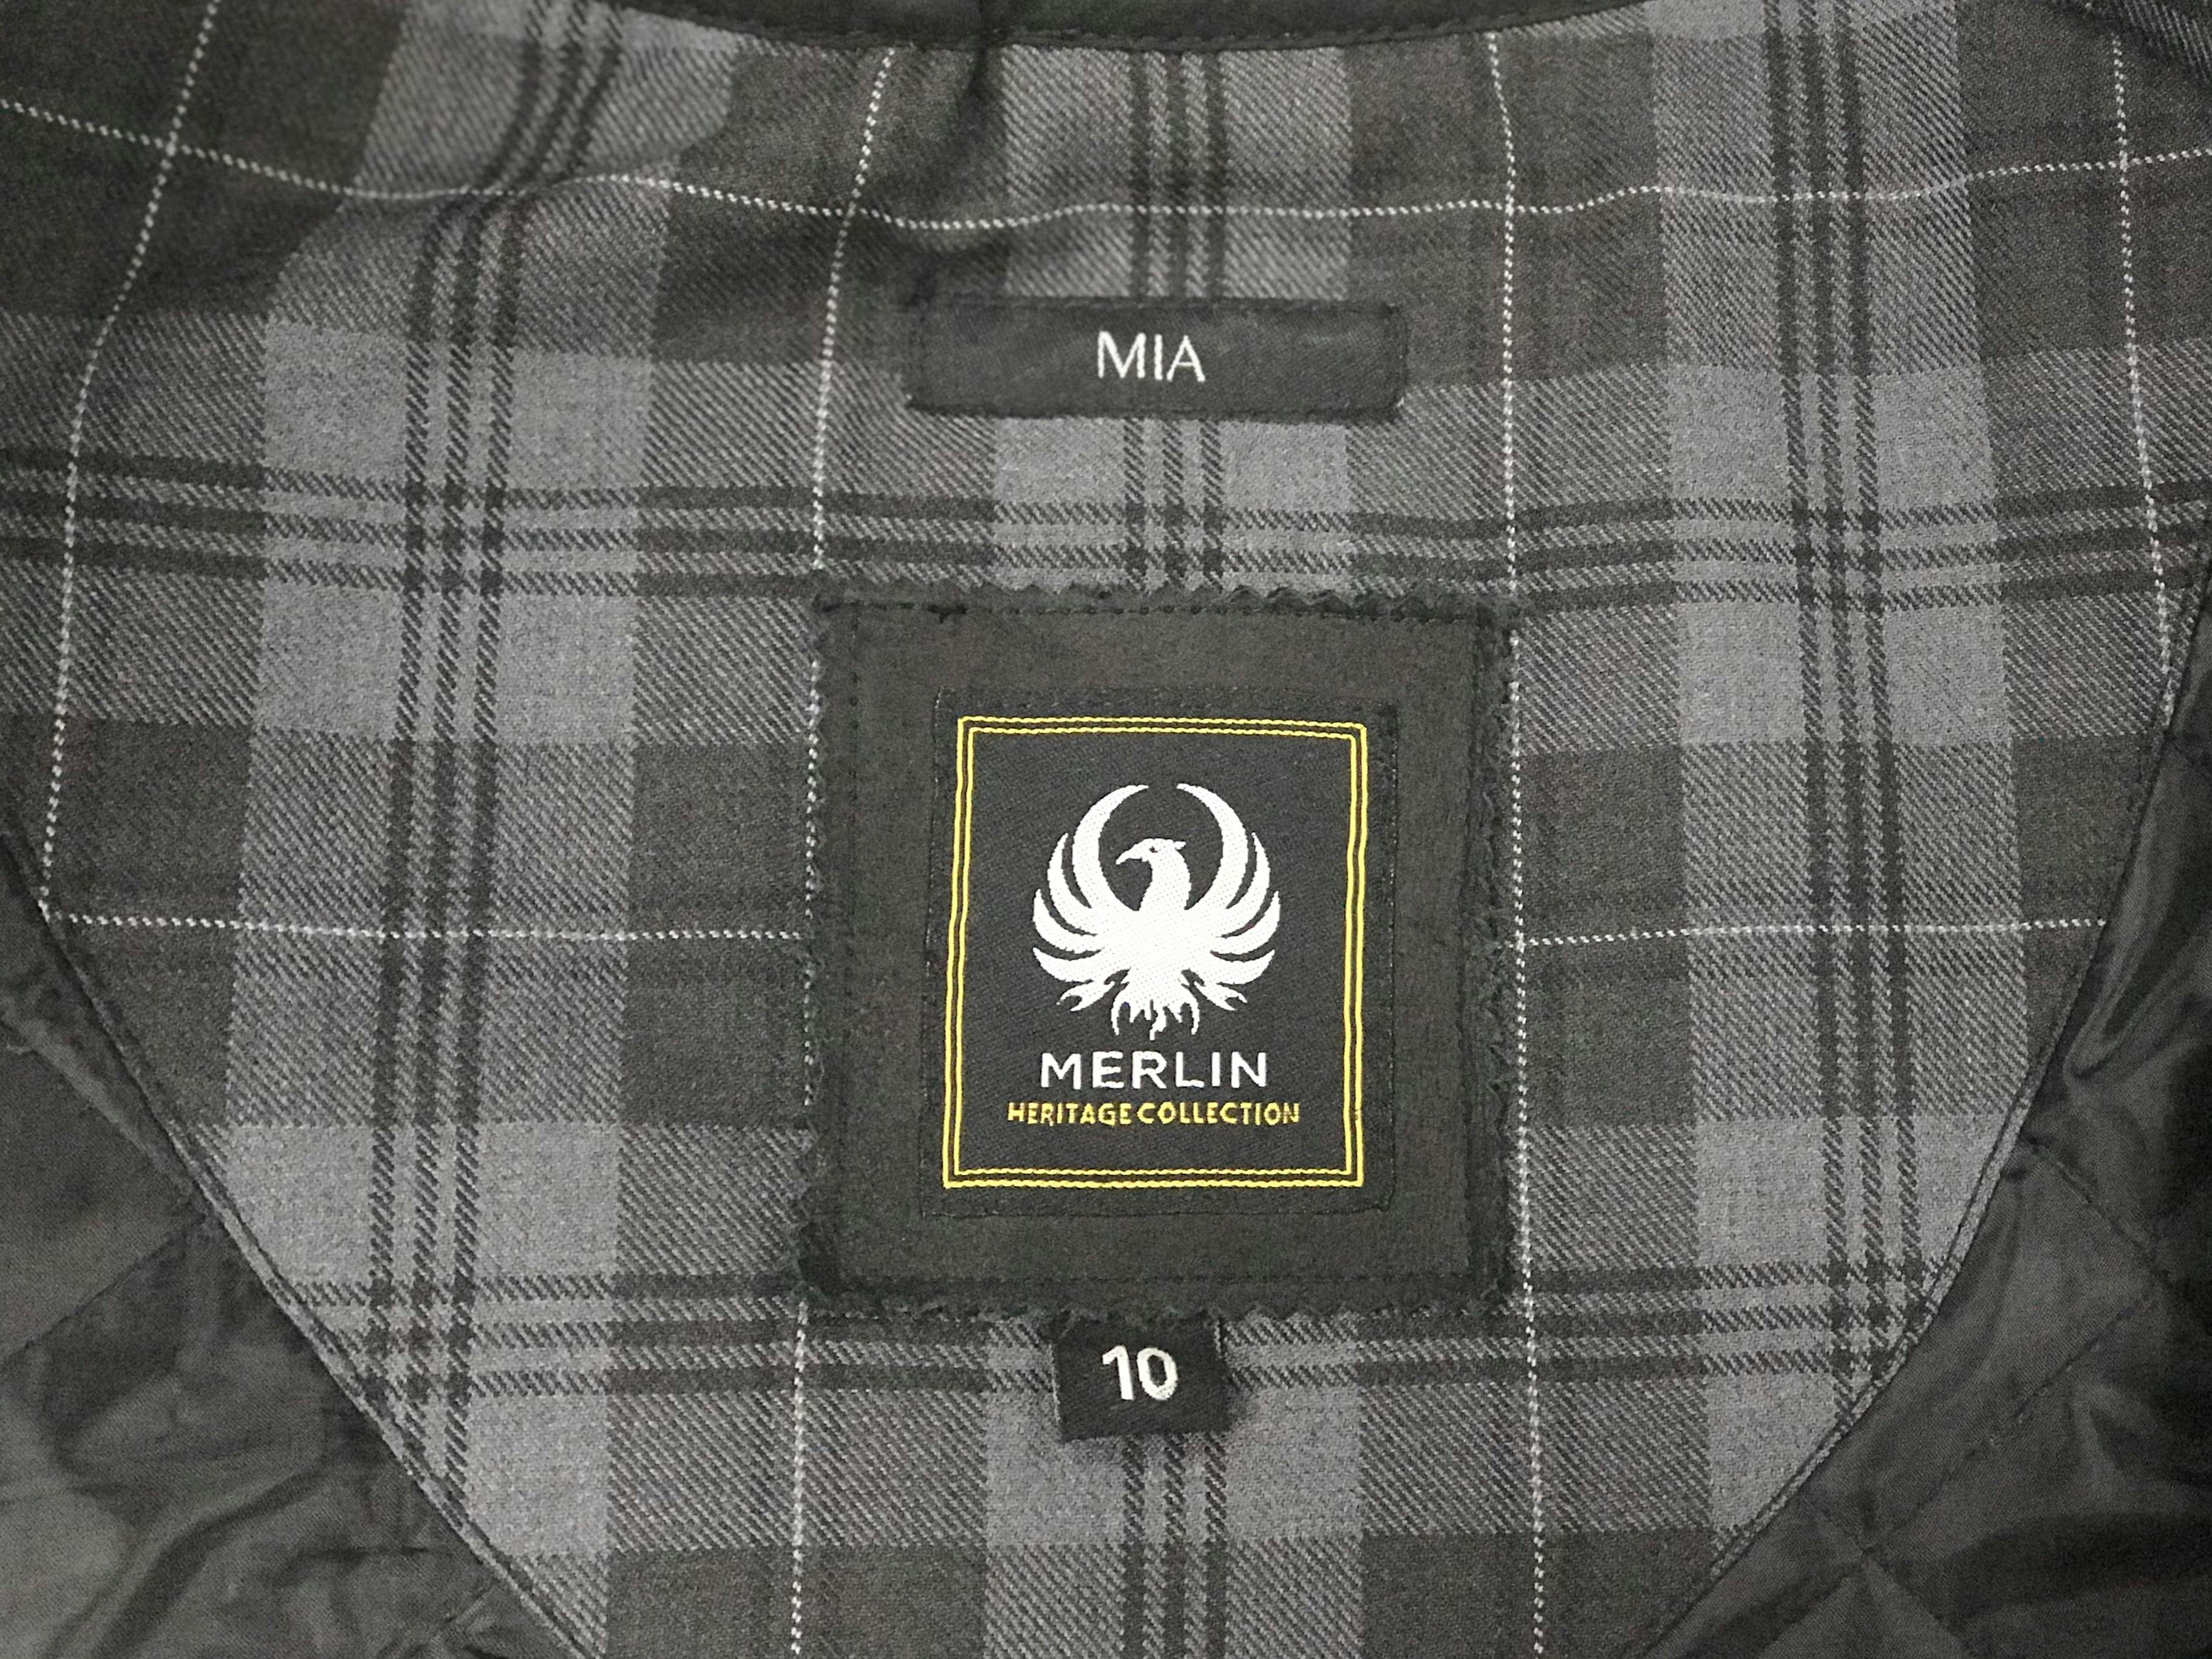 The inside with logo and size of a Merlin Mia jacket